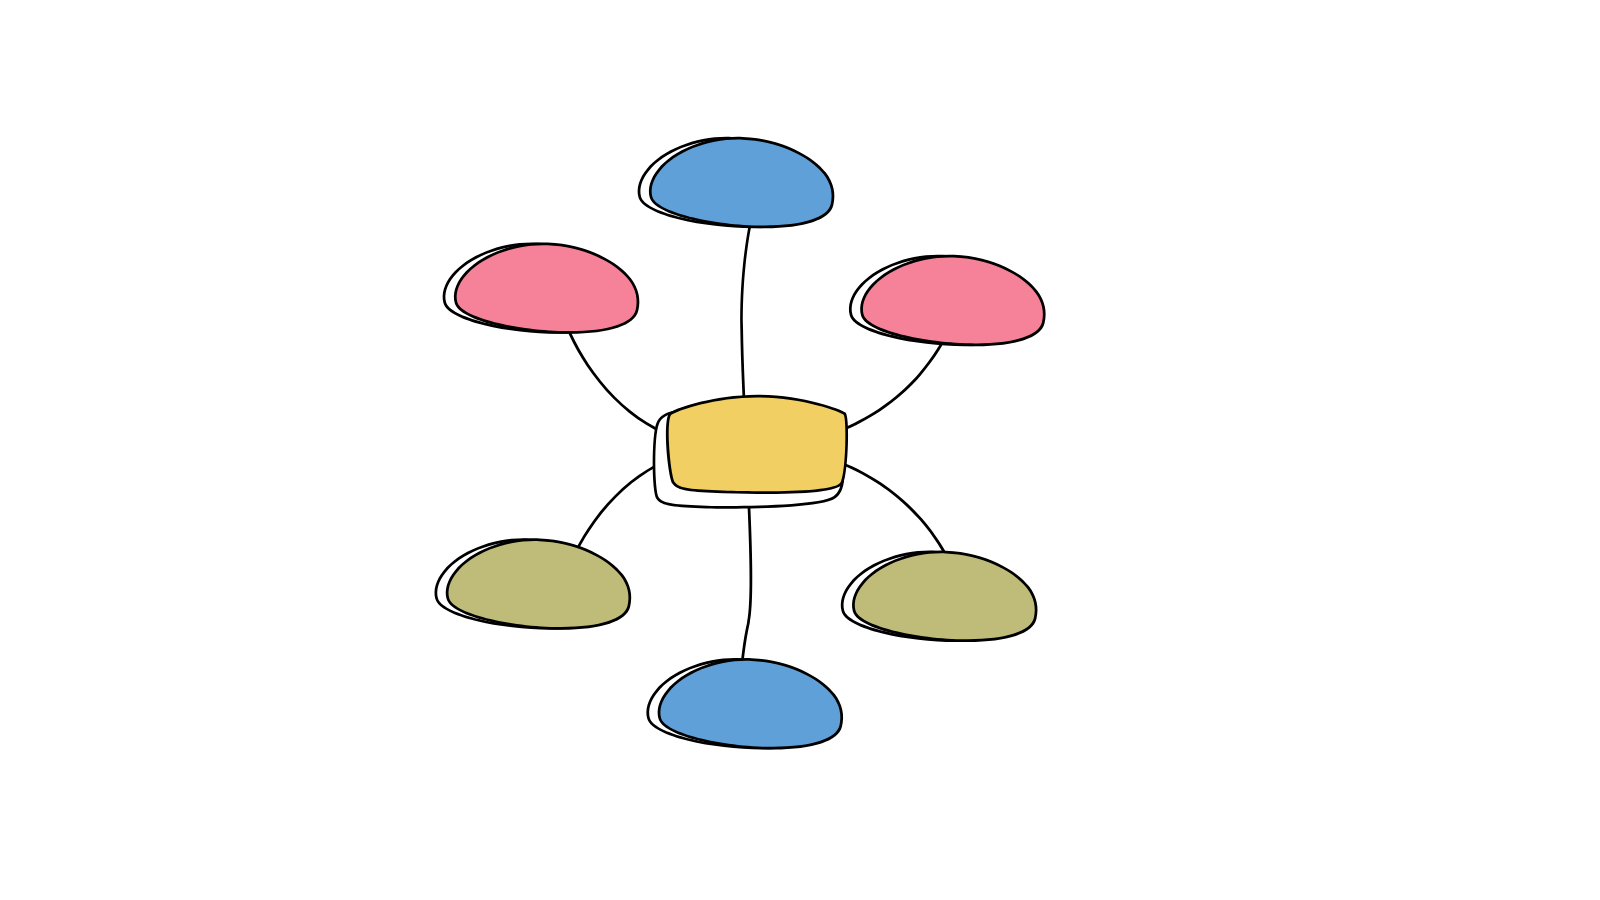 A multicolored brainstorming web